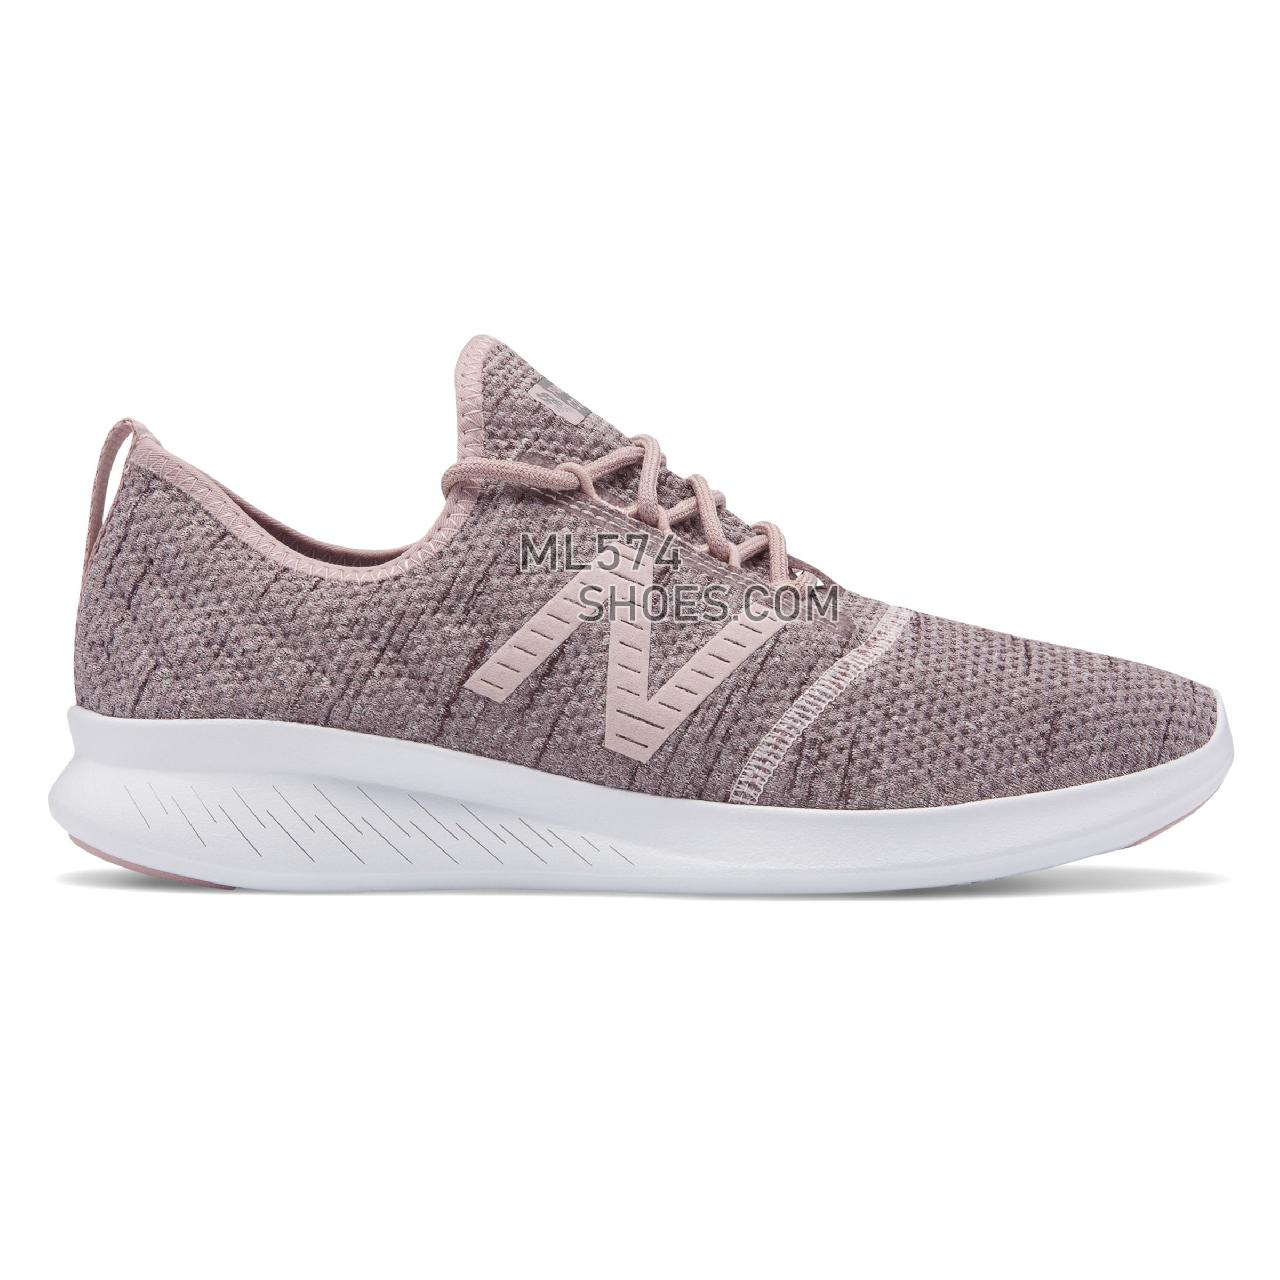 New Balance FuelCore Coast v4 Hoodie - Women's 4 - Running Conch Shell with Himalayan Pink - WCSTLRH4